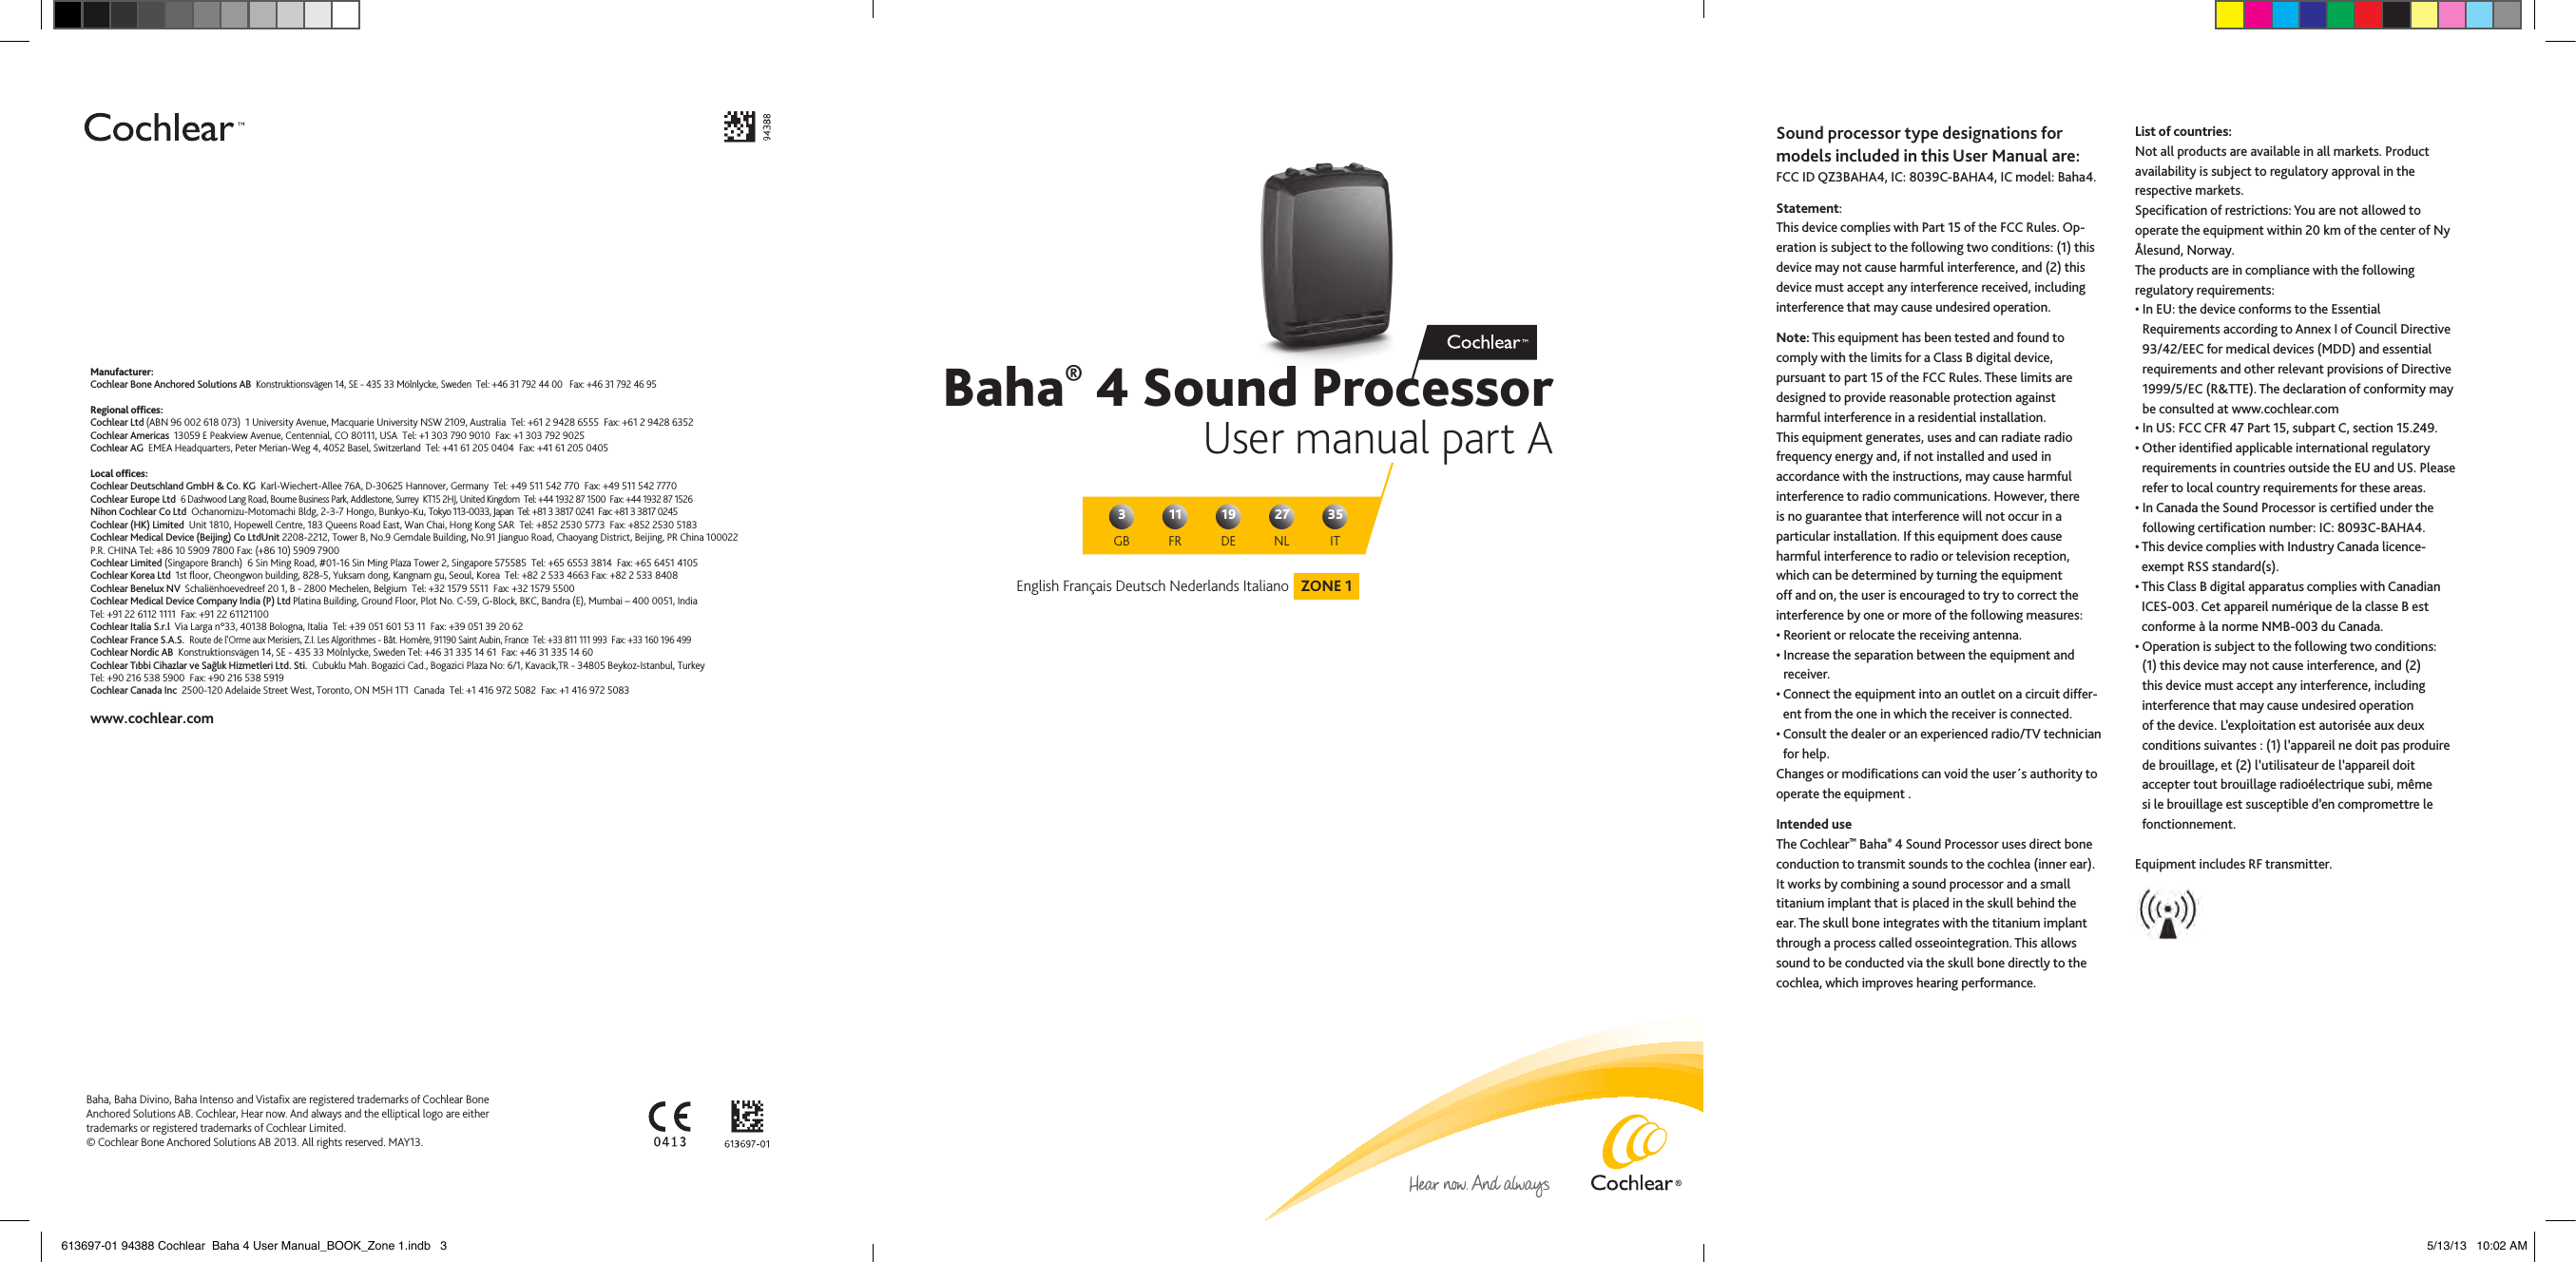 Baha® 4 Sound ProcessorUser manual part AZONE 1English Français Deutsch Nederlands ItalianoGB311 19 27 35FR DE NL ITManufacturer:Cochlear Bone Anchored Solutions AB  Konstruktionsvägen 14, SE - 435 33 Mölnlycke, Sweden  Tel: +46 31 792 44 00   Fax: +46 31 792 46 95Regional ofﬁces:Cochlear Ltd (ABN 96 002 618 073)  1 University Avenue, Macquarie University NSW 2109, Australia  Tel: +61 2 9428 6555  Fax: +61 2 9428 6352Cochlear Americas  13059 E Peakview Avenue, Centennial, CO 80111, USA  Tel: +1 303 790 9010  Fax: +1 303 792 9025Cochlear AG  EMEA Headquarters, Peter Merian-Weg 4, 4052 Basel, Switzerland  Tel: +41 61 205 0404  Fax: +41 61 205 0405Local ofﬁces:Cochlear Deutschland GmbH &amp; Co. KG  Karl-Wiechert-Allee 76A, D-30625 Hannover, Germany  Tel: +49 511 542 770  Fax: +49 511 542 7770Cochlear Europe Ltd  6 Dashwood Lang Road, Bourne Business Park, Addlestone, Surrey  KT15 2HJ, United Kingdom  Tel: +44 1932 87 1500  Fax: +44 1932 87 1526Nihon Cochlear Co Ltd  Ochanomizu-Motomachi Bldg, 2-3-7 Hongo, Bunkyo-Ku, Tokyo 113-0033, Japan  Tel: +81 3 3817 0241  Fax: +81 3 3817 0245Cochlear (HK) Limited  Unit 1810, Hopewell Centre, 183 Queens Road East, Wan Chai, Hong Kong SAR  Tel: +852 2530 5773  Fax: +852 2530 5183Cochlear Medical Device (Beijing) Co LtdUnit 2208-2212, Tower B, No.9 Gemdale Building, No.91 Jianguo Road, Chaoyang District, Beijing, PR China 100022 P.R. CHINA Tel: +86 10 5909 7800 Fax: (+86 10) 5909 7900Cochlear Limited (Singapore Branch)  6 Sin Ming Road, #01-16 Sin Ming Plaza Tower 2, Singapore 575585  Tel: +65 6553 3814  Fax: +65 6451 4105Cochlear Korea Ltd  1st ﬂoor, Cheongwon building, 828-5, Yuksam dong, Kangnam gu, Seoul, Korea  Tel: +82 2 533 4663 Fax: +82 2 533 8408Cochlear Benelux NV  Schaliënhoevedreef 20 1, B - 2800 Mechelen, Belgium  Tel: +32 1579 5511  Fax: +32 1579 5500Cochlear Medical Device Company India (P) Ltd Platina Building, Ground Floor, Plot No. C-59, G-Block, BKC, Bandra (E), Mumbai – 400 0051, IndiaTel: +91 22 6112 1111  Fax: +91 22 61121100Cochlear Italia S.r.l  Via Larga n°33, 40138 Bologna, Italia  Tel: +39 051 601 53 11  Fax: +39 051 39 20 62Cochlear France S.A.S.  Route de l’Orme aux Merisiers, Z.I. Les Algorithmes - Bât. Homère, 91190 Saint Aubin, France  Tel: +33 811 111 993  Fax: +33 160 196 499Cochlear Nordic AB  Konstruktionsvägen 14, SE - 435 33 Mölnlycke, Sweden Tel: +46 31 335 14 61  Fax: +46 31 335 14 60Cochlear Tıbbi Cihazlar ve Sağlık Hizmetleri Ltd. Sti.  Cubuklu Mah. Bogazici Cad., Bogazici Plaza No: 6/1, Kavacik,TR - 34805 Beykoz-Istanbul, Turkey  Tel: +90 216 538 5900  Fax: +90 216 538 5919Cochlear Canada Inc  2500-120 Adelaide Street West, Toronto, ON M5H 1T1  Canada  Tel: +1 416 972 5082  Fax: +1 416 972 5083www.cochlear.comBaha, Baha Divino, Baha Intenso and Vistaﬁx are registered trademarks of Cochlear Bone Anchored Solutions AB. Cochlear, Hear now. And always and the elliptical logo are either trademarks or registered trademarks of Cochlear Limited.© Cochlear Bone Anchored Solutions AB 2013. All rights reserved. MAY13. Sound processor type designations for models included in this User Manual are: FCC ID QZ3BAHA4, IC: 8039C-BAHA4, IC model: Baha4.Statement:This device complies with Part 15 of the FCC Rules. Op-eration is subject to the following two conditions: (1) this device may not cause harmful interference, and (2) this device must accept any interference received, including interference that may cause undesired operation.Note: This equipment has been tested and found to comply with the limits for a Class B digital device, pursuant to part 15 of the FCC Rules. These limits are designed to provide reasonable protection against harmful interference in a residential installation. This equipment generates, uses and can radiate radio frequency energy and, if not installed and used in accordance with the instructions, may cause harmful interference to radio communications. However, there is no guarantee that interference will not occur in a particular installation. If this equipment does cause harmful interference to radio or television reception, which can be determined by turning the equipment off and on, the user is encouraged to try to correct the interference by one or more of the following measures:•  Reorient or relocate the receiving antenna.•  Increase the separation between the equipment and receiver.•  Connect the equipment into an outlet on a circuit differ-ent from the one in which the receiver is connected.•  Consult the dealer or an experienced radio/TV technician for help.Changes or modiﬁcations can void the user´s authority to operate the equipment . Intended useThe Cochlear™ Baha® 4 Sound Processor uses direct bone conduction to transmit sounds to the cochlea (inner ear). It works by combining a sound processor and a small titanium implant that is placed in the skull behind the ear. The skull bone integrates with the titanium implant through a process called osseointegration. This allows sound to be conducted via the skull bone directly to the cochlea, which improves hearing performance.List of countries:Not all products are available in all markets. Product availability is subject to regulatory approval in the respective markets.Speciﬁcation of restrictions: You are not allowed to operate the equipment within 20 km of the center of Ny Ålesund, Norway.The products are in compliance with the following regulatory requirements:•  In EU: the device conforms to the Essential Requirements according to Annex I of Council Directive 93/42/EEC for medical devices (MDD) and essential requirements and other relevant provisions of Directive 1999/5/EC (R&amp;TTE). The declaration of conformity may be consulted at www.cochlear.com•  In US: FCC CFR 47 Part 15, subpart C, section 15.249.•  Other identiﬁed applicable international regulatory requirements in countries outside the EU and US. Please refer to local country requirements for these areas.•   In Canada the Sound Processor is certiﬁed under the following certiﬁcation number: IC: 8093C-BAHA4.•  This device complies with Industry Canada licence-exempt RSS standard(s).•  This Class B digital apparatus complies with Canadian ICES-003. Cet appareil numérique de la classe B est conforme à la norme NMB-003 du Canada.•  Operation is subject to the following two conditions: (1) this device may not cause interference, and (2) this device must accept any interference, including interference that may cause undesired operation of the device. L’exploitation est autorisée aux deux conditions suivantes : (1) l’appareil ne doit pas produire de brouillage, et (2) l’utilisateur de l’appareil doit accepter tout brouillage radioélectrique subi, même si le brouillage est susceptible d’en compromettre le fonctionnement.Equipment includes RF transmitter.613697-01 94388 Cochlear  Baha 4 User Manual_BOOK_Zone 1.indb   3 5/13/13   10:02 AM